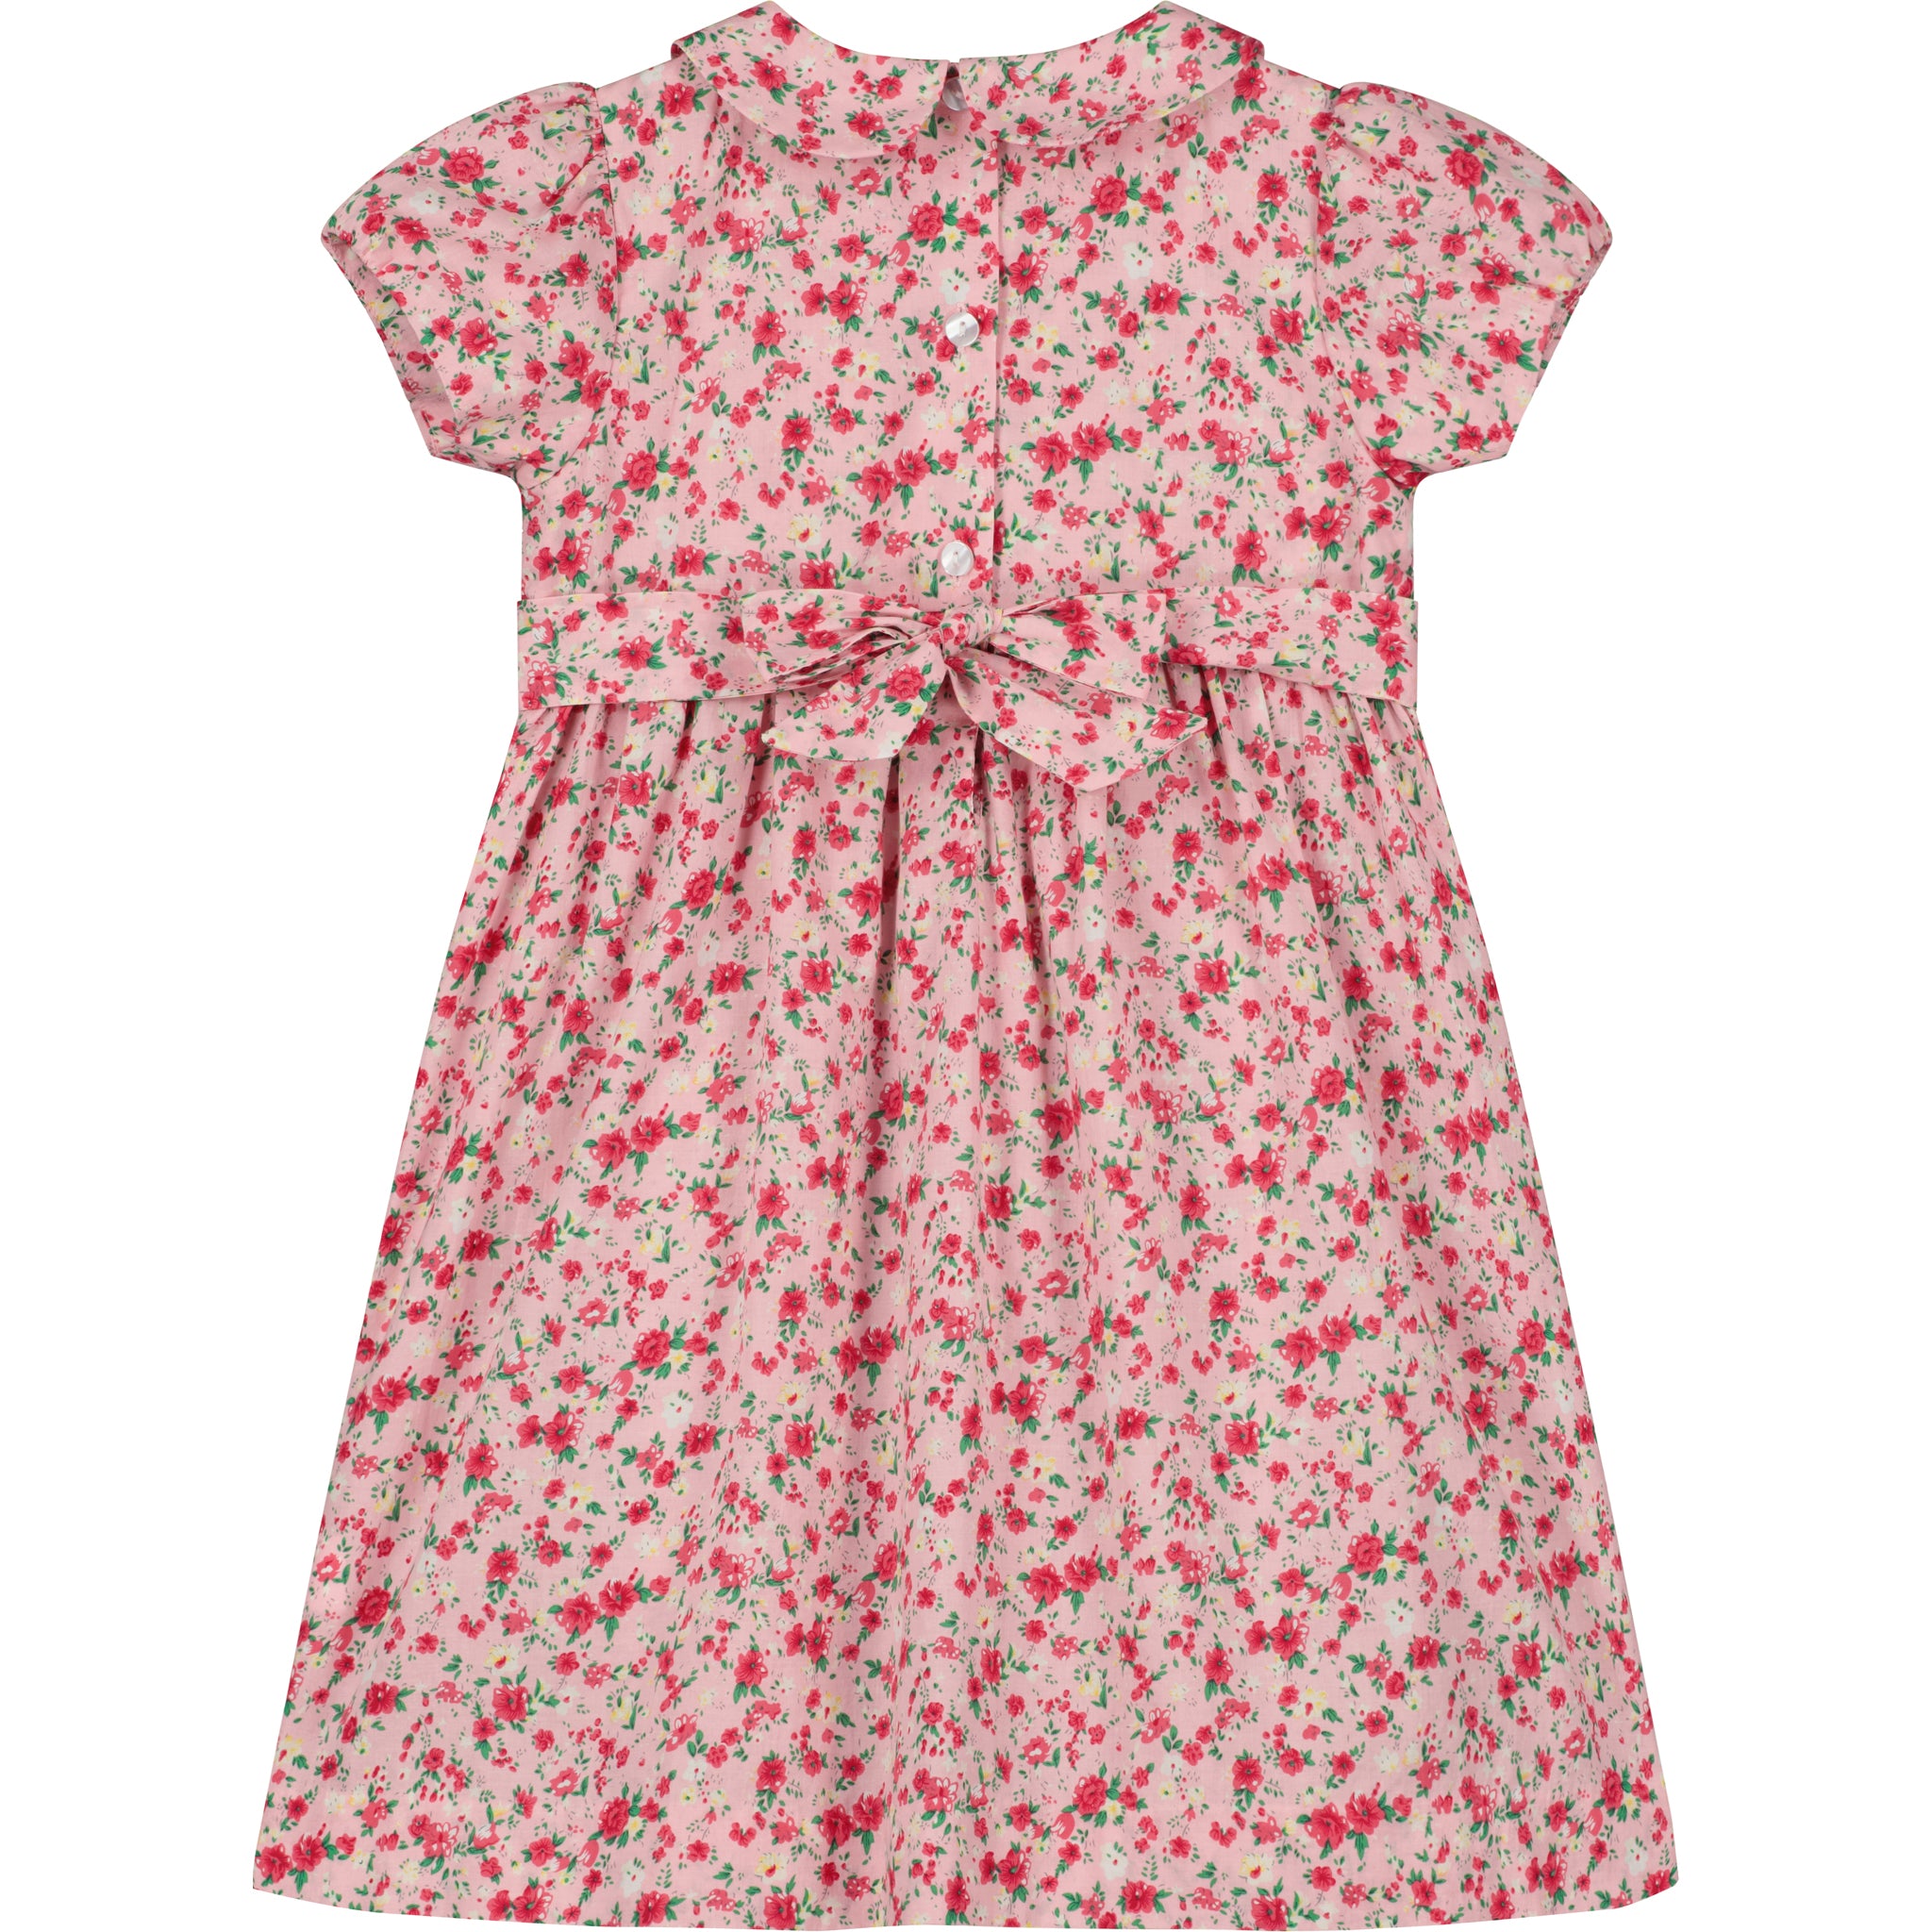 red and pink smock dress for girls, bow fastening at the back